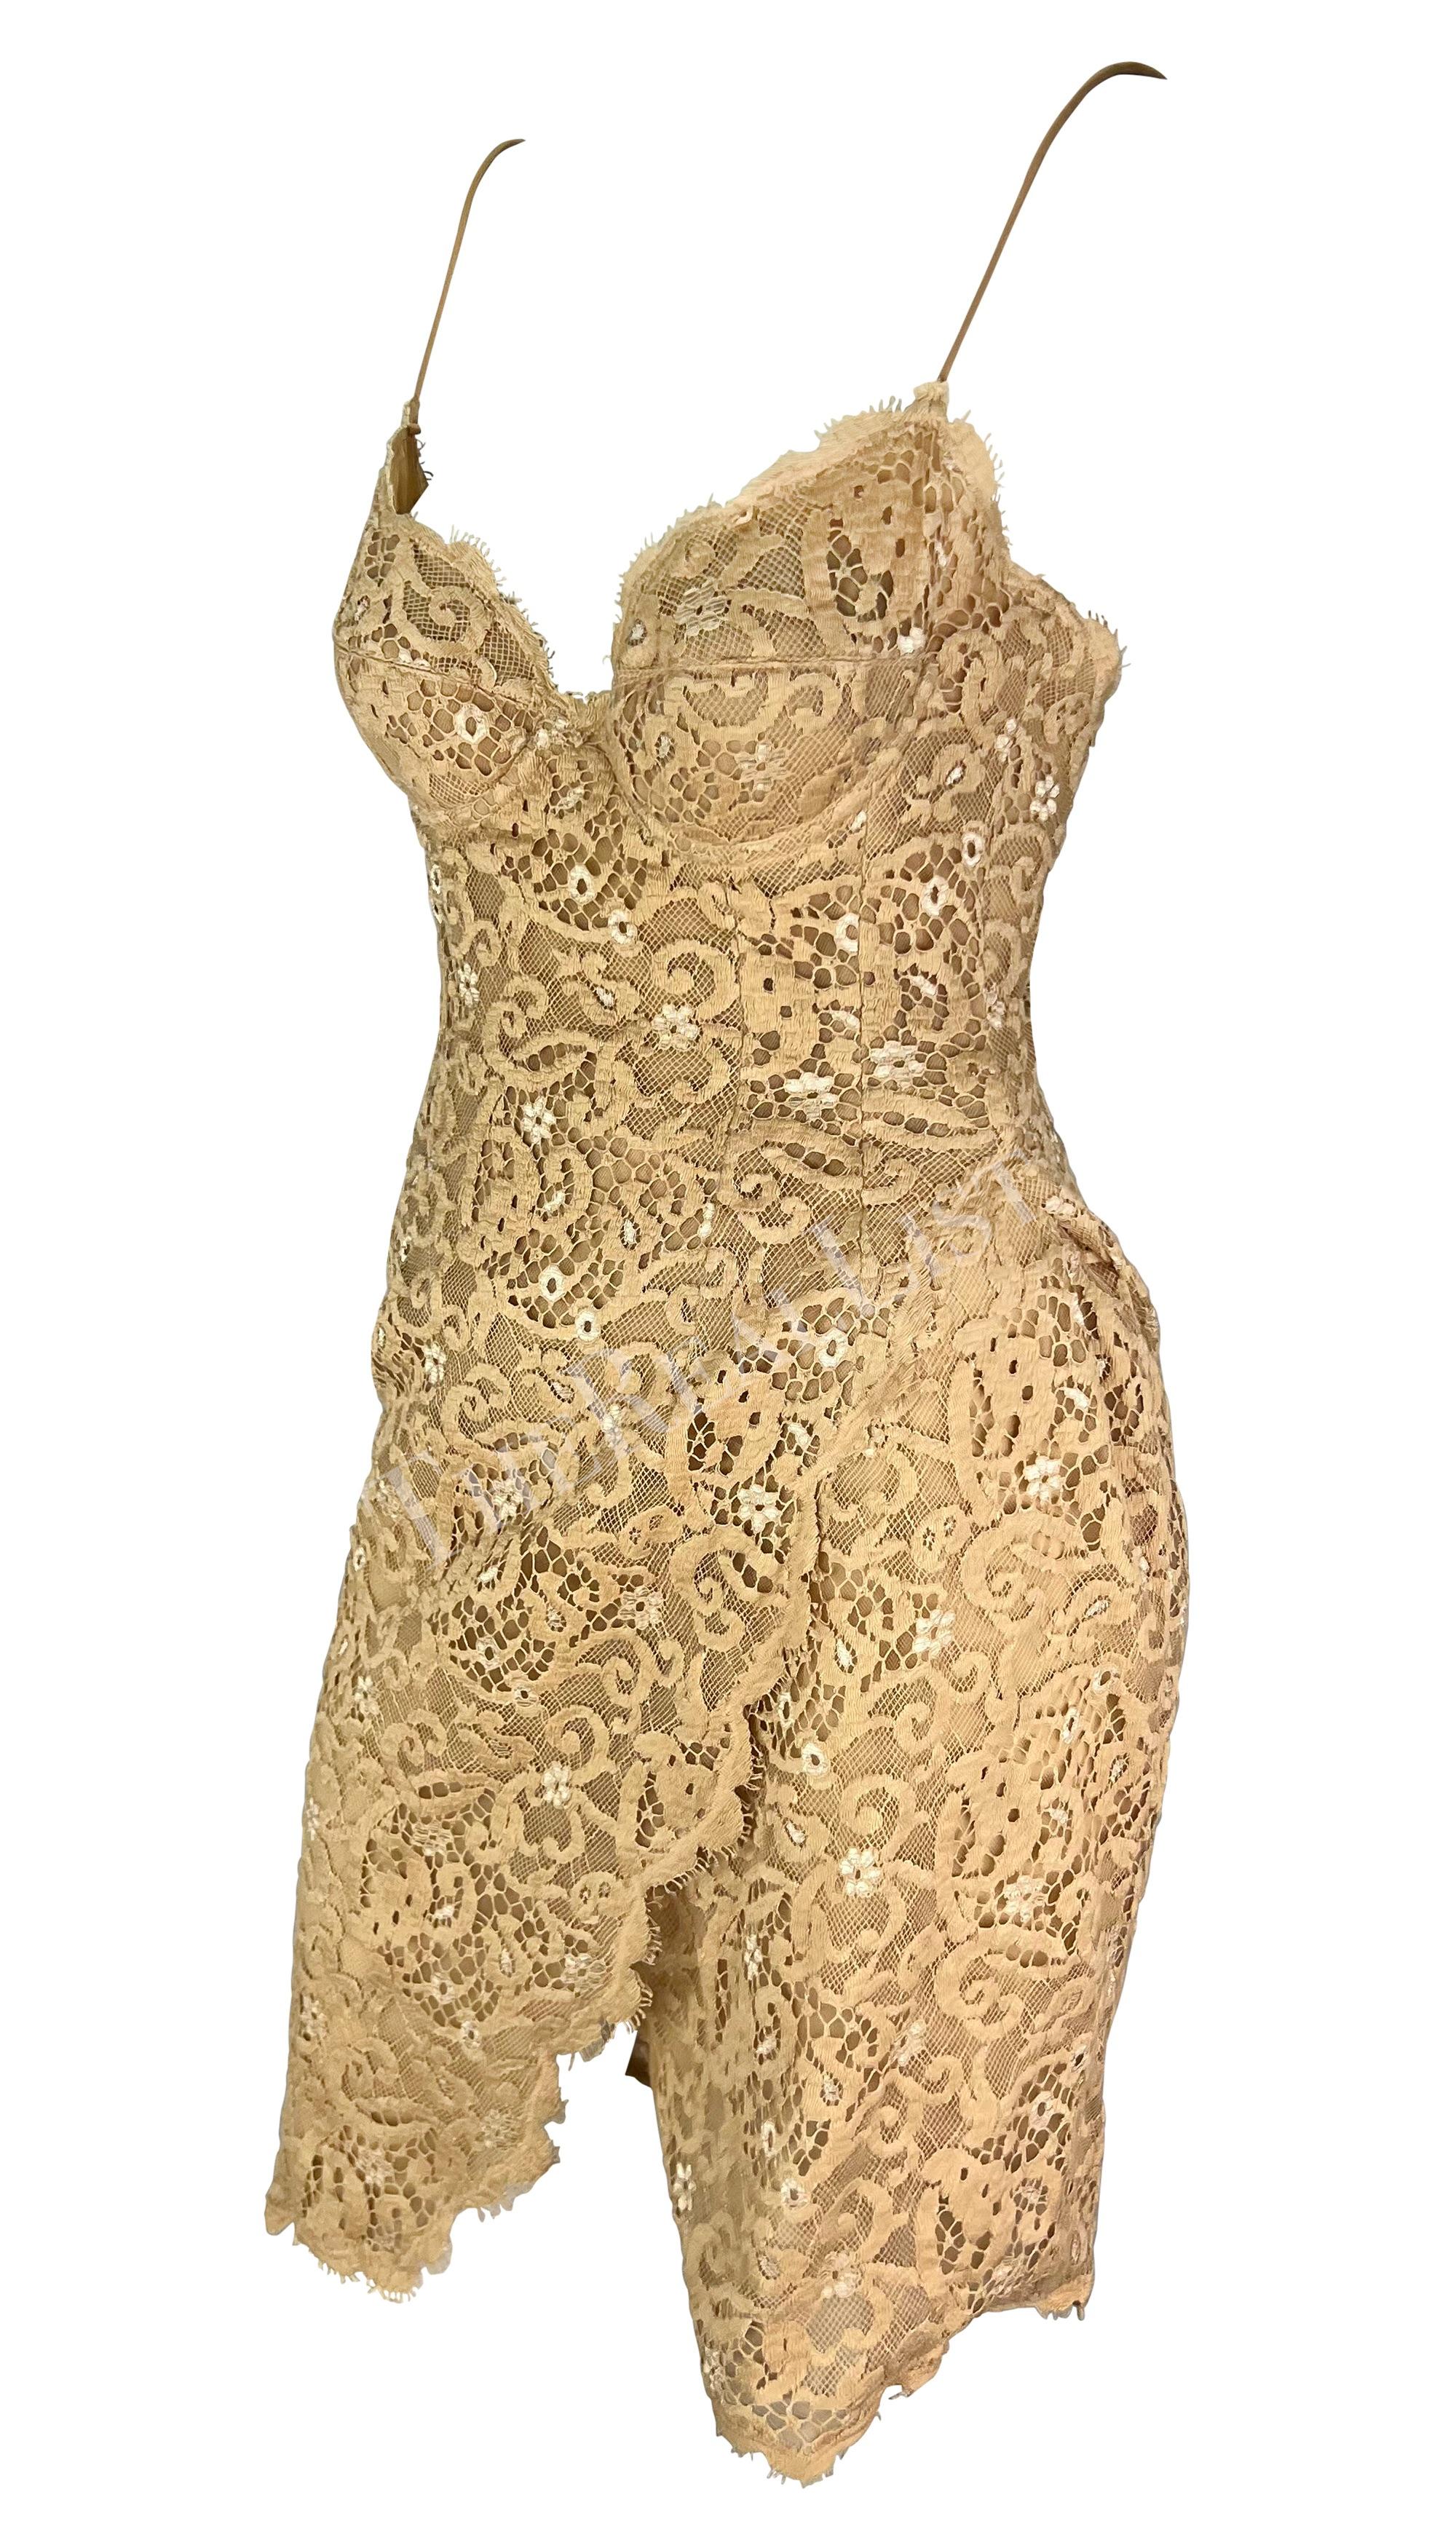 NWT S/S 1995 Donna Karan Runway Beige Lace Wrap Style Slip Dress In Excellent Condition For Sale In West Hollywood, CA